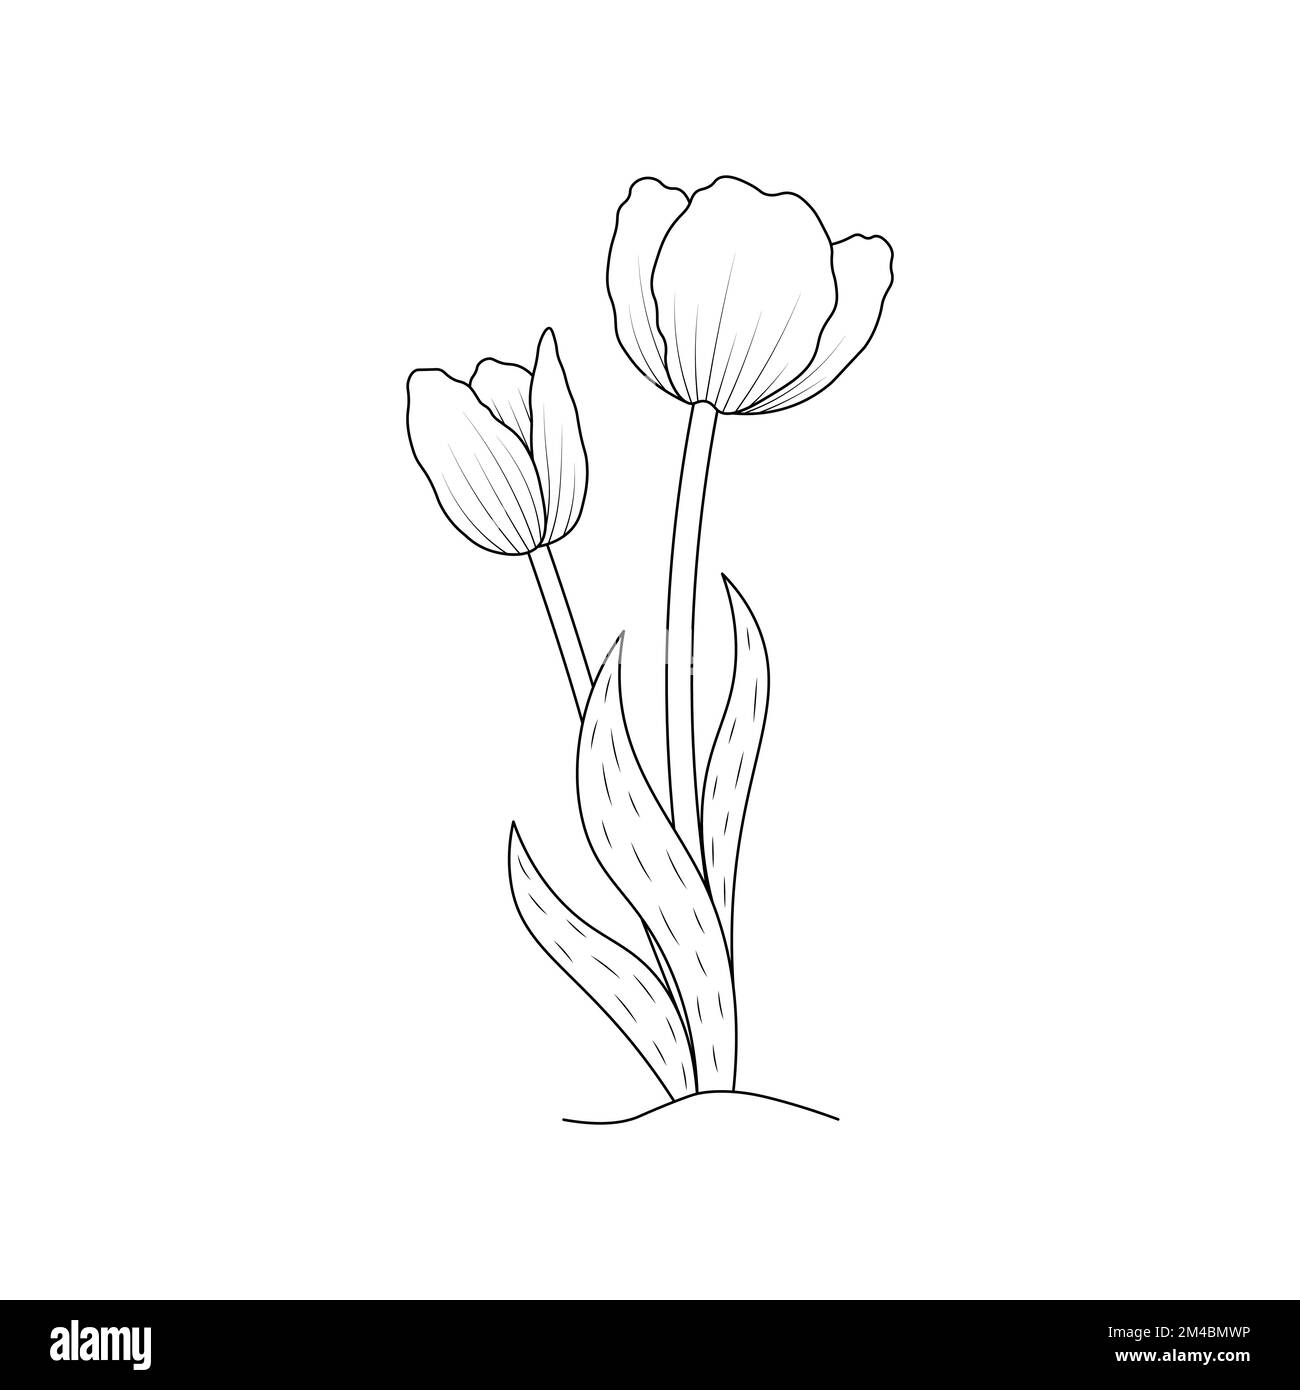 tulip flower coloring page design for book printing template continuous black stroke Stock Vector